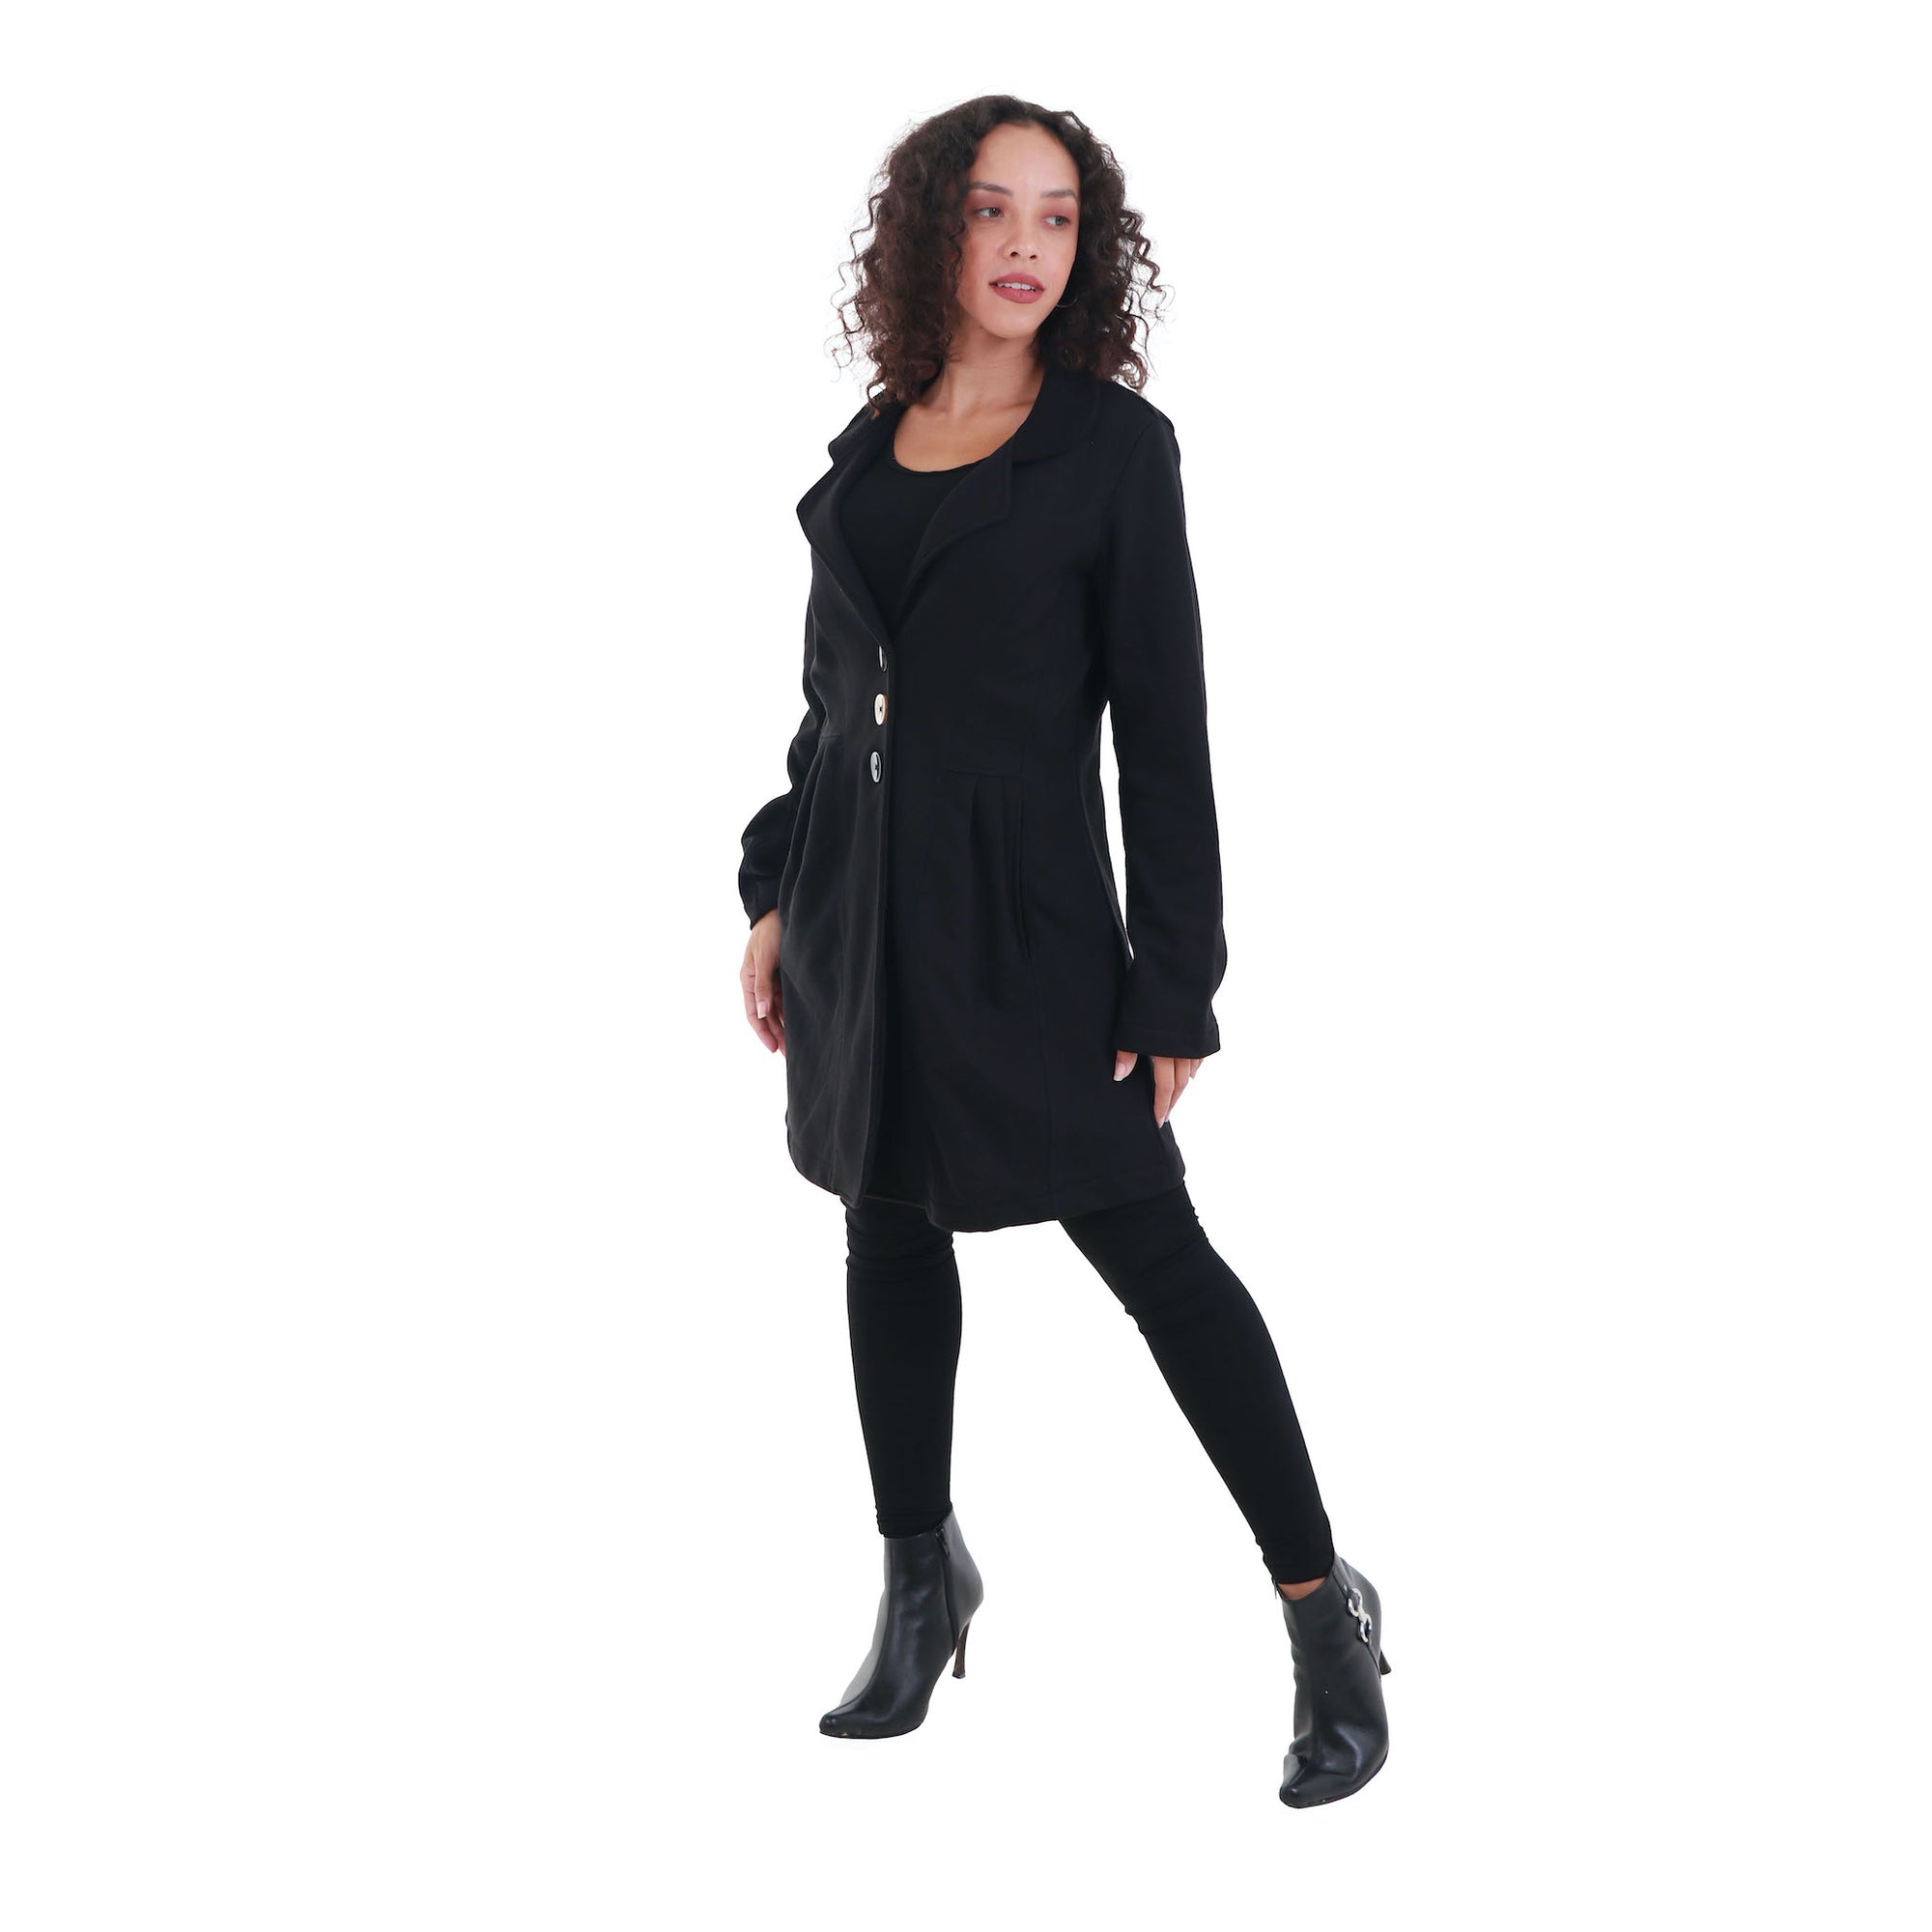 women's spring jackets in black | many colors to choose from | sort by sizes